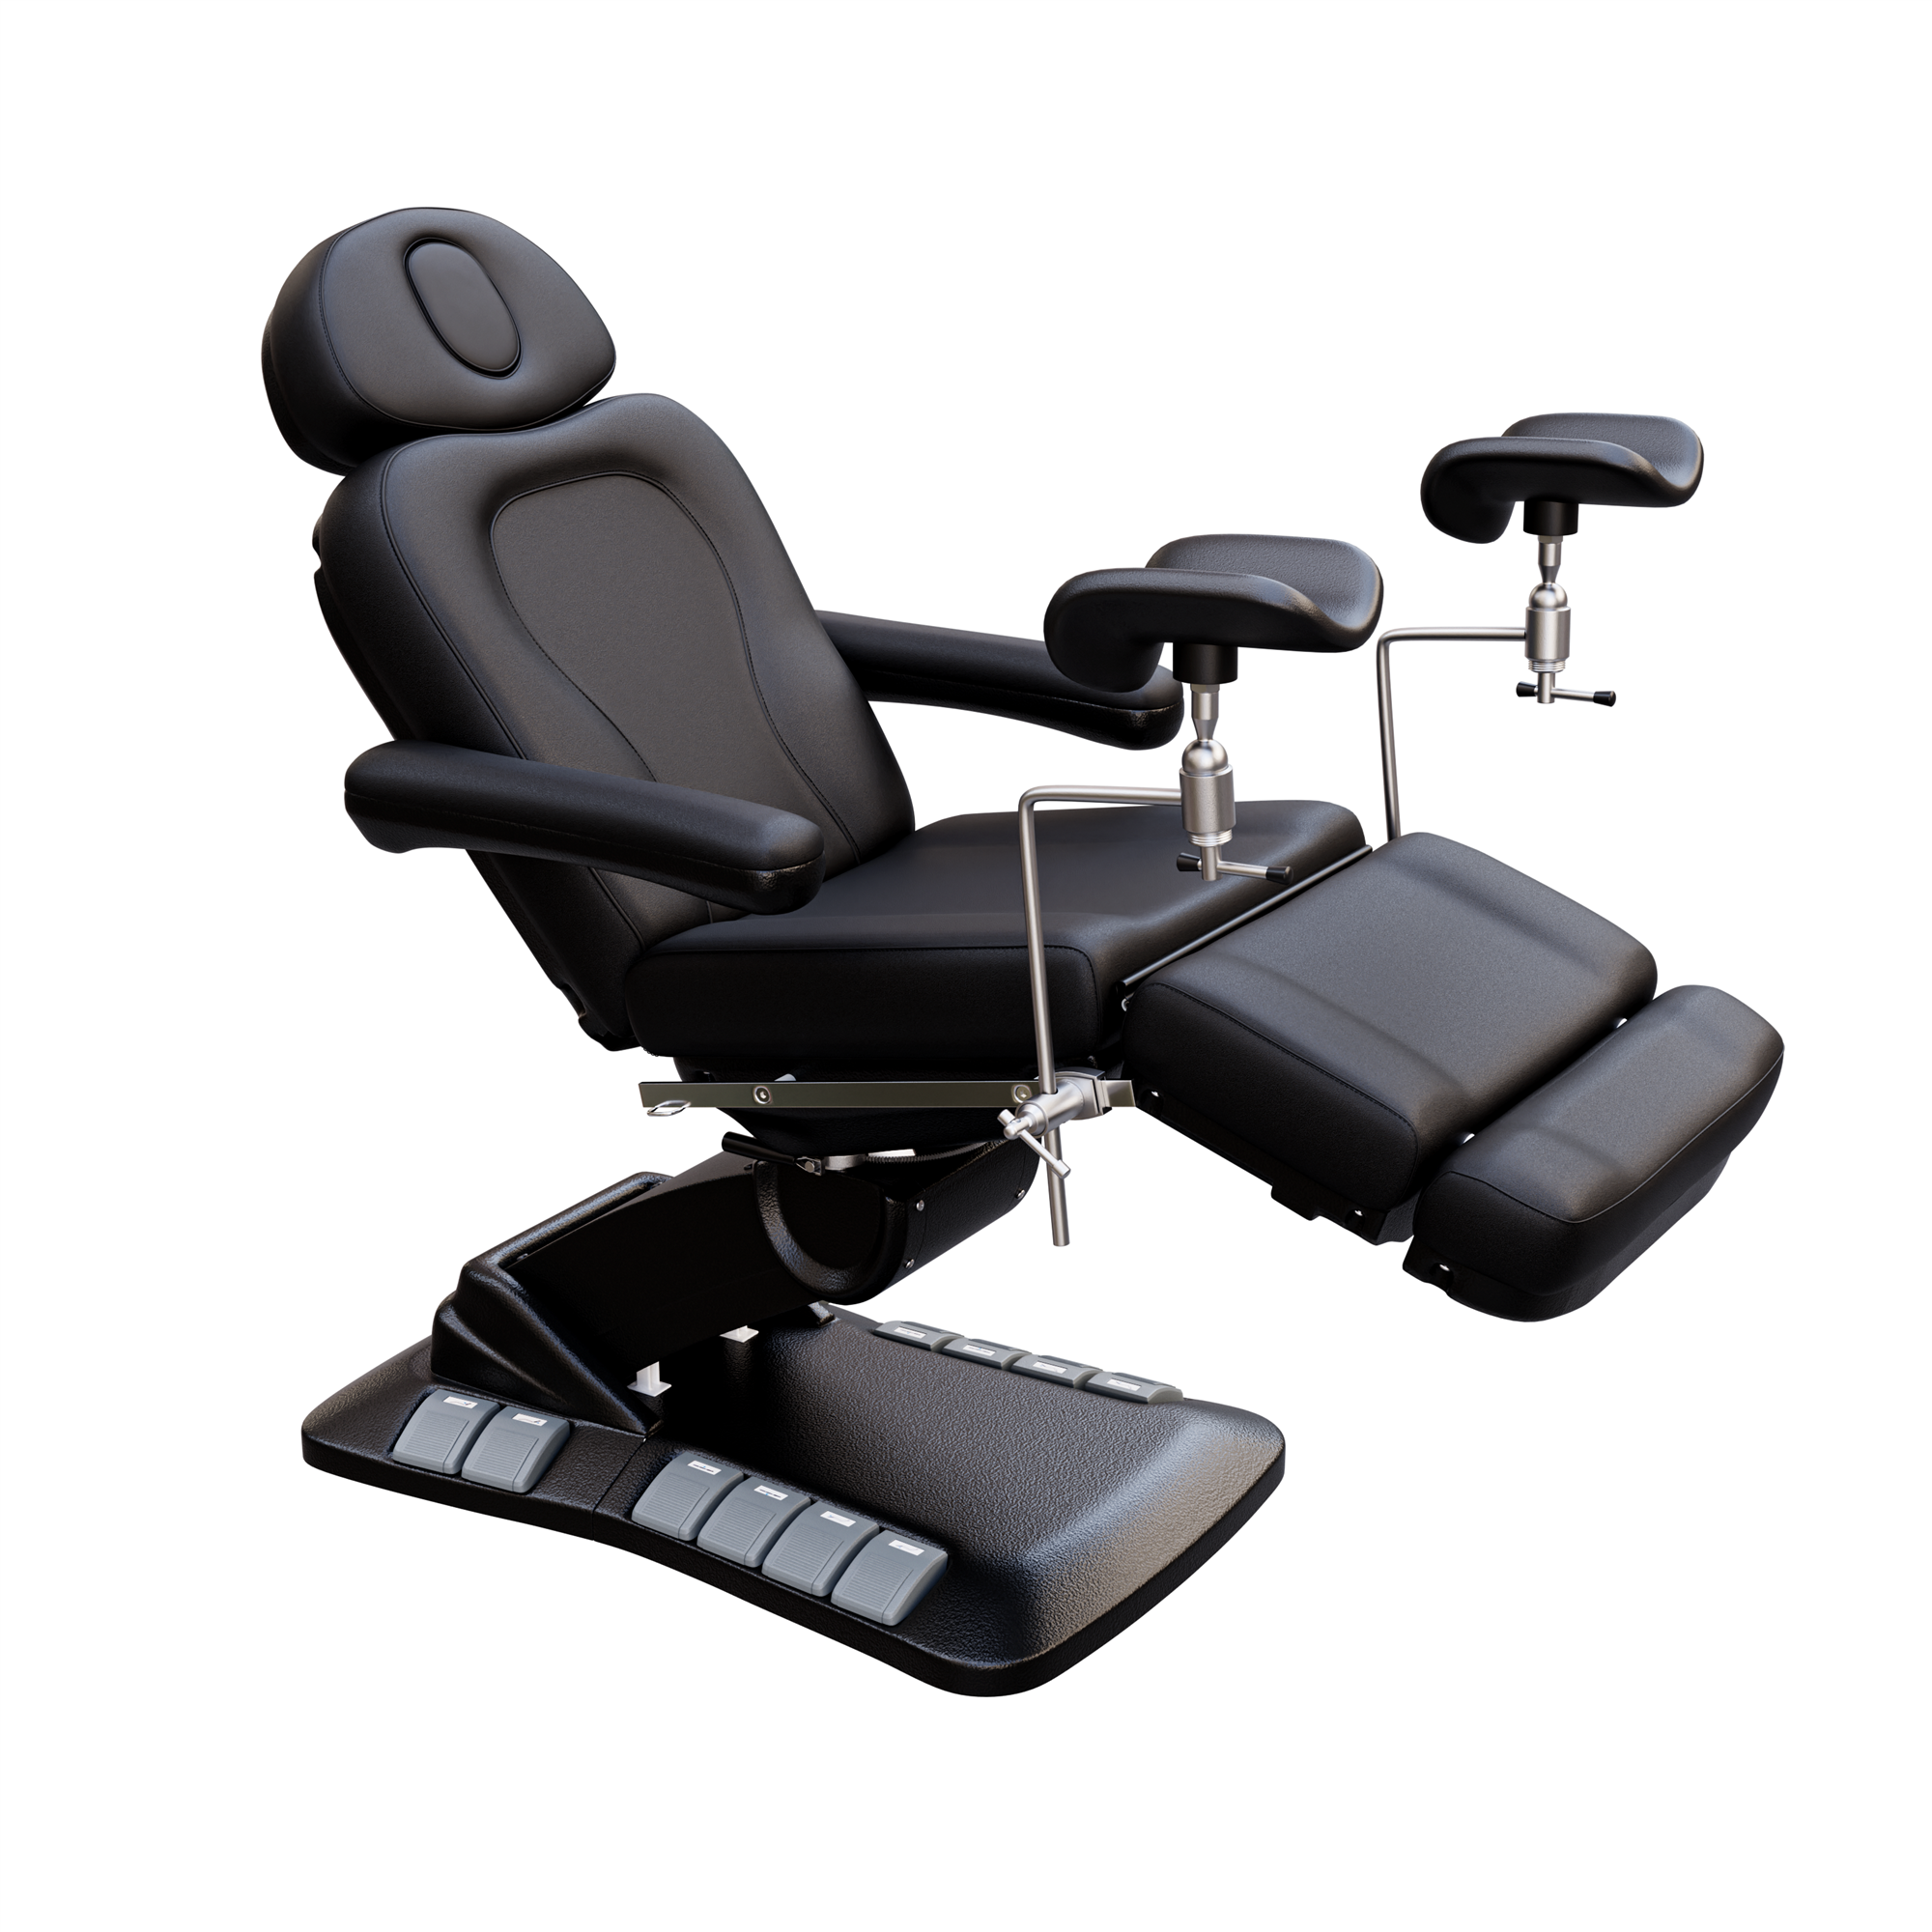 Spa Numa OB-GYN SWIVEL DELUXE 4 Motor Electric Treatment Chair Bed with Built-in Foot Pedals - 2246EB - SU-All-Black